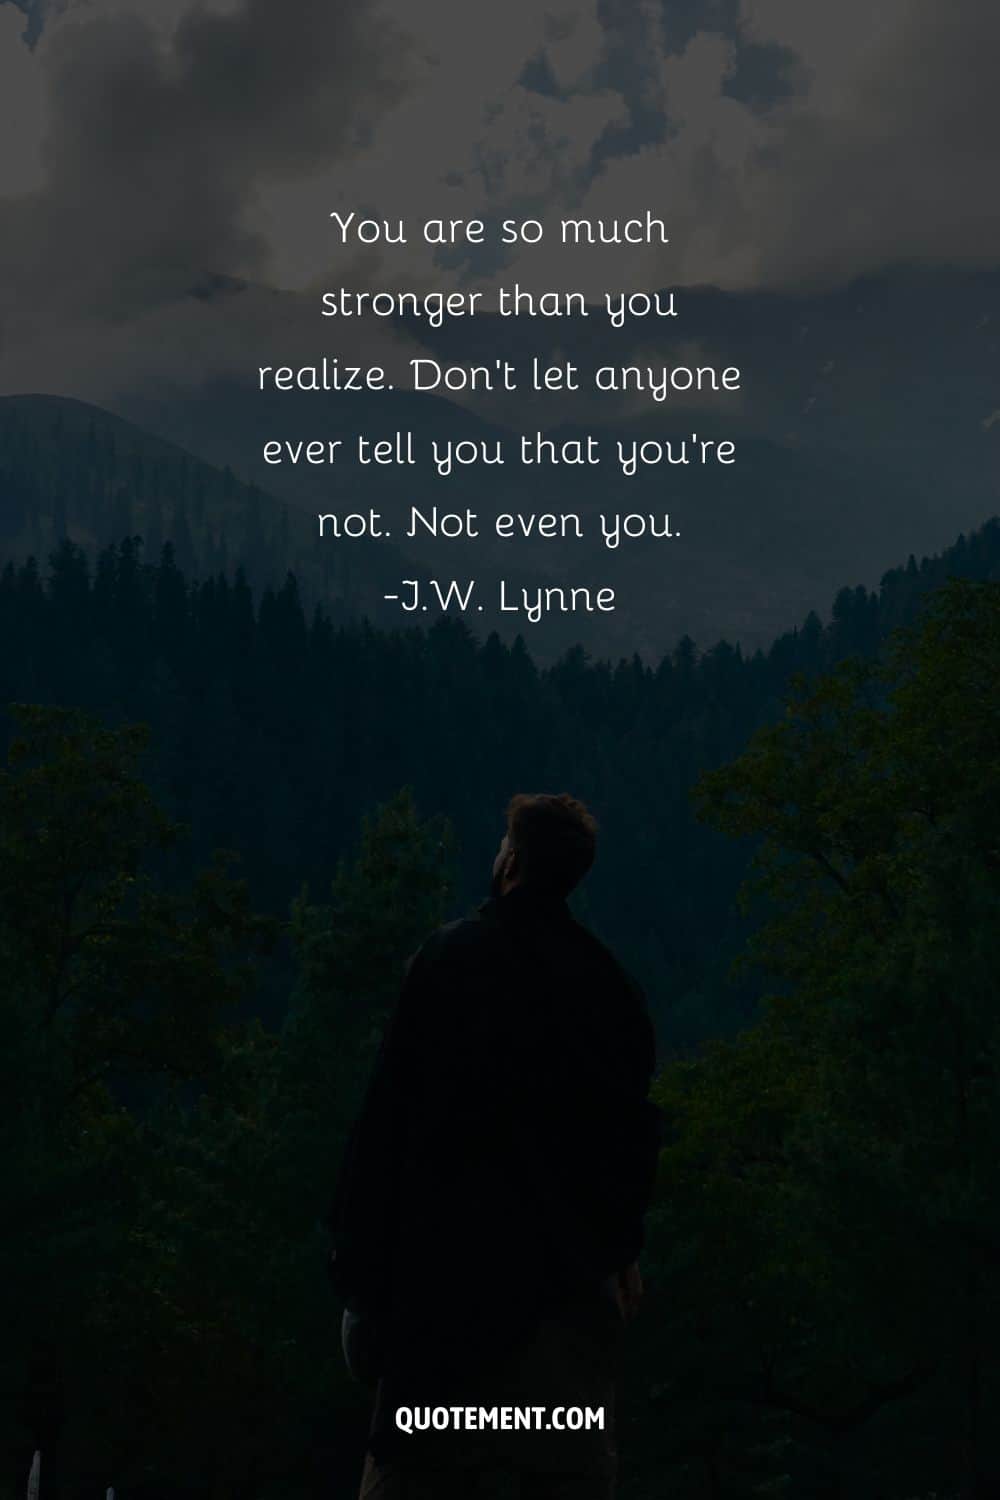 You are so much stronger than you realize.